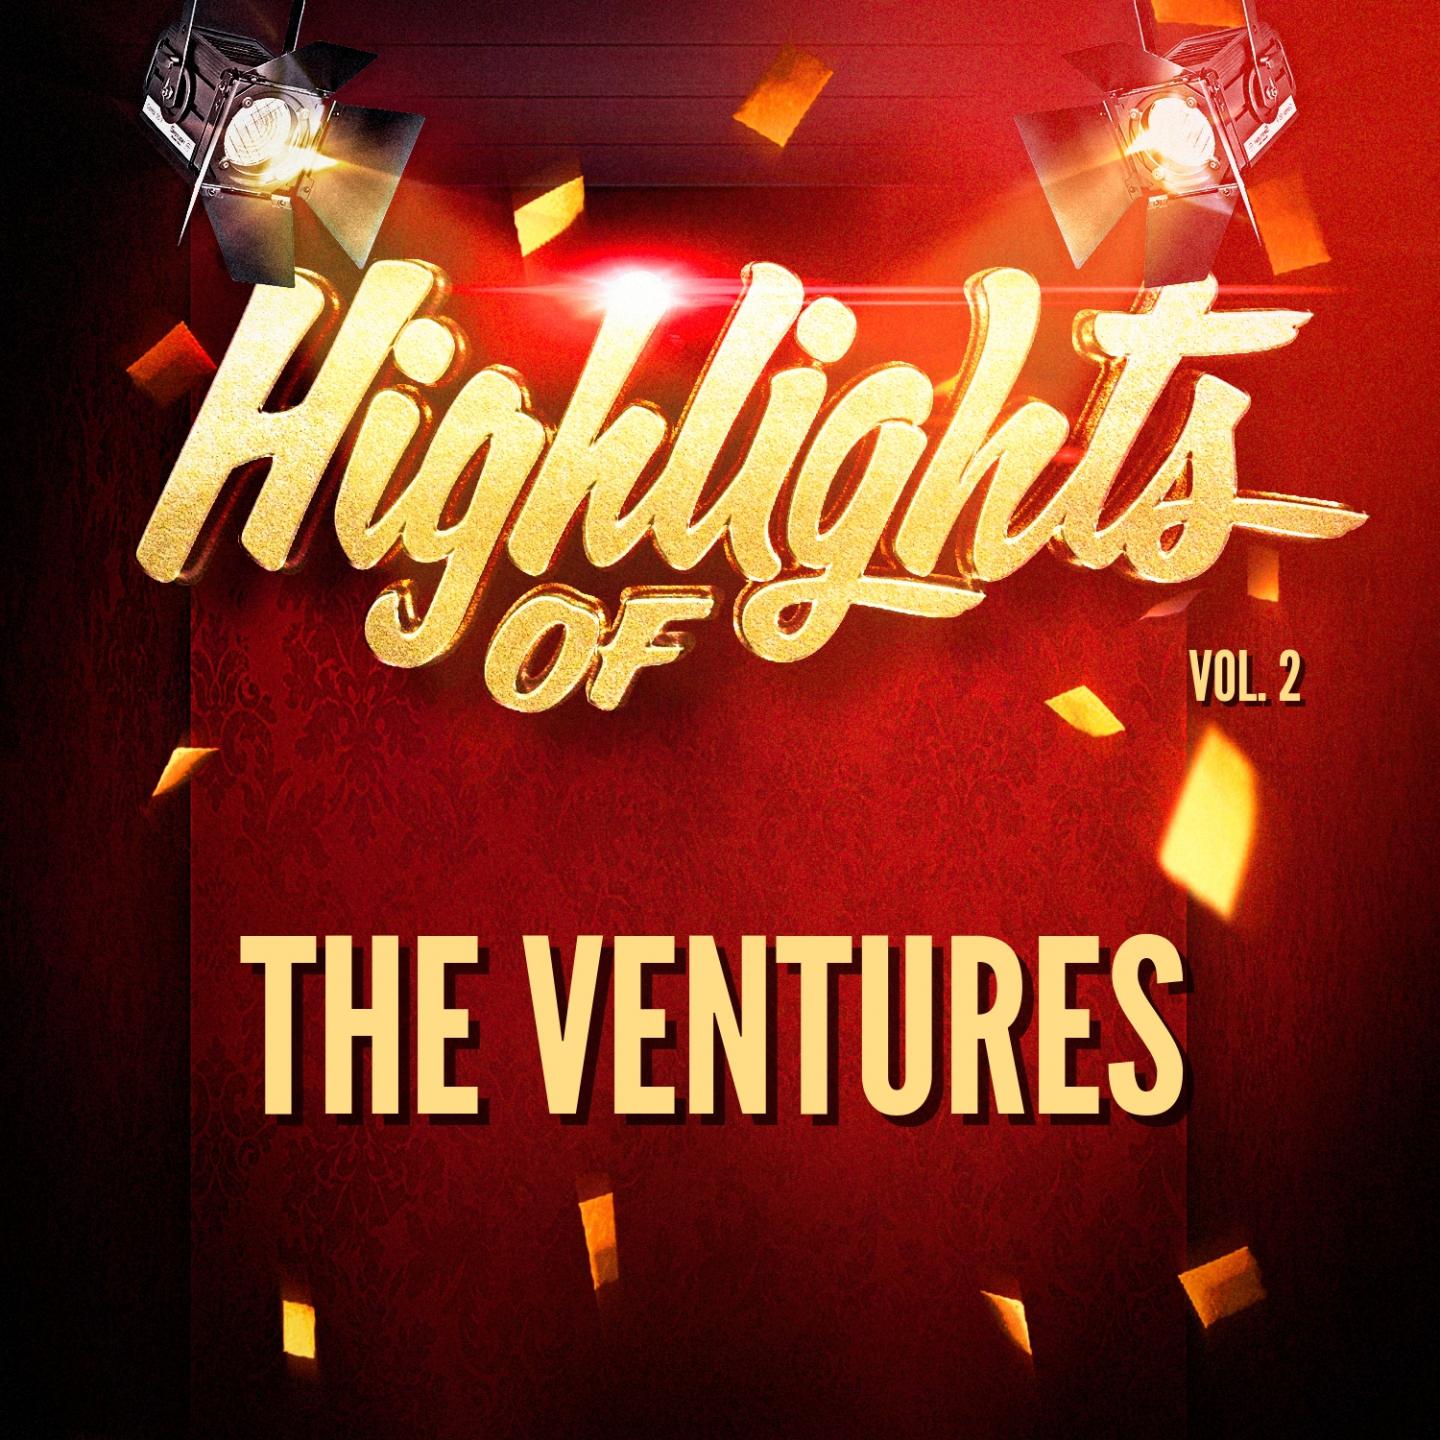 Highlights of The Ventures, Vol. 2